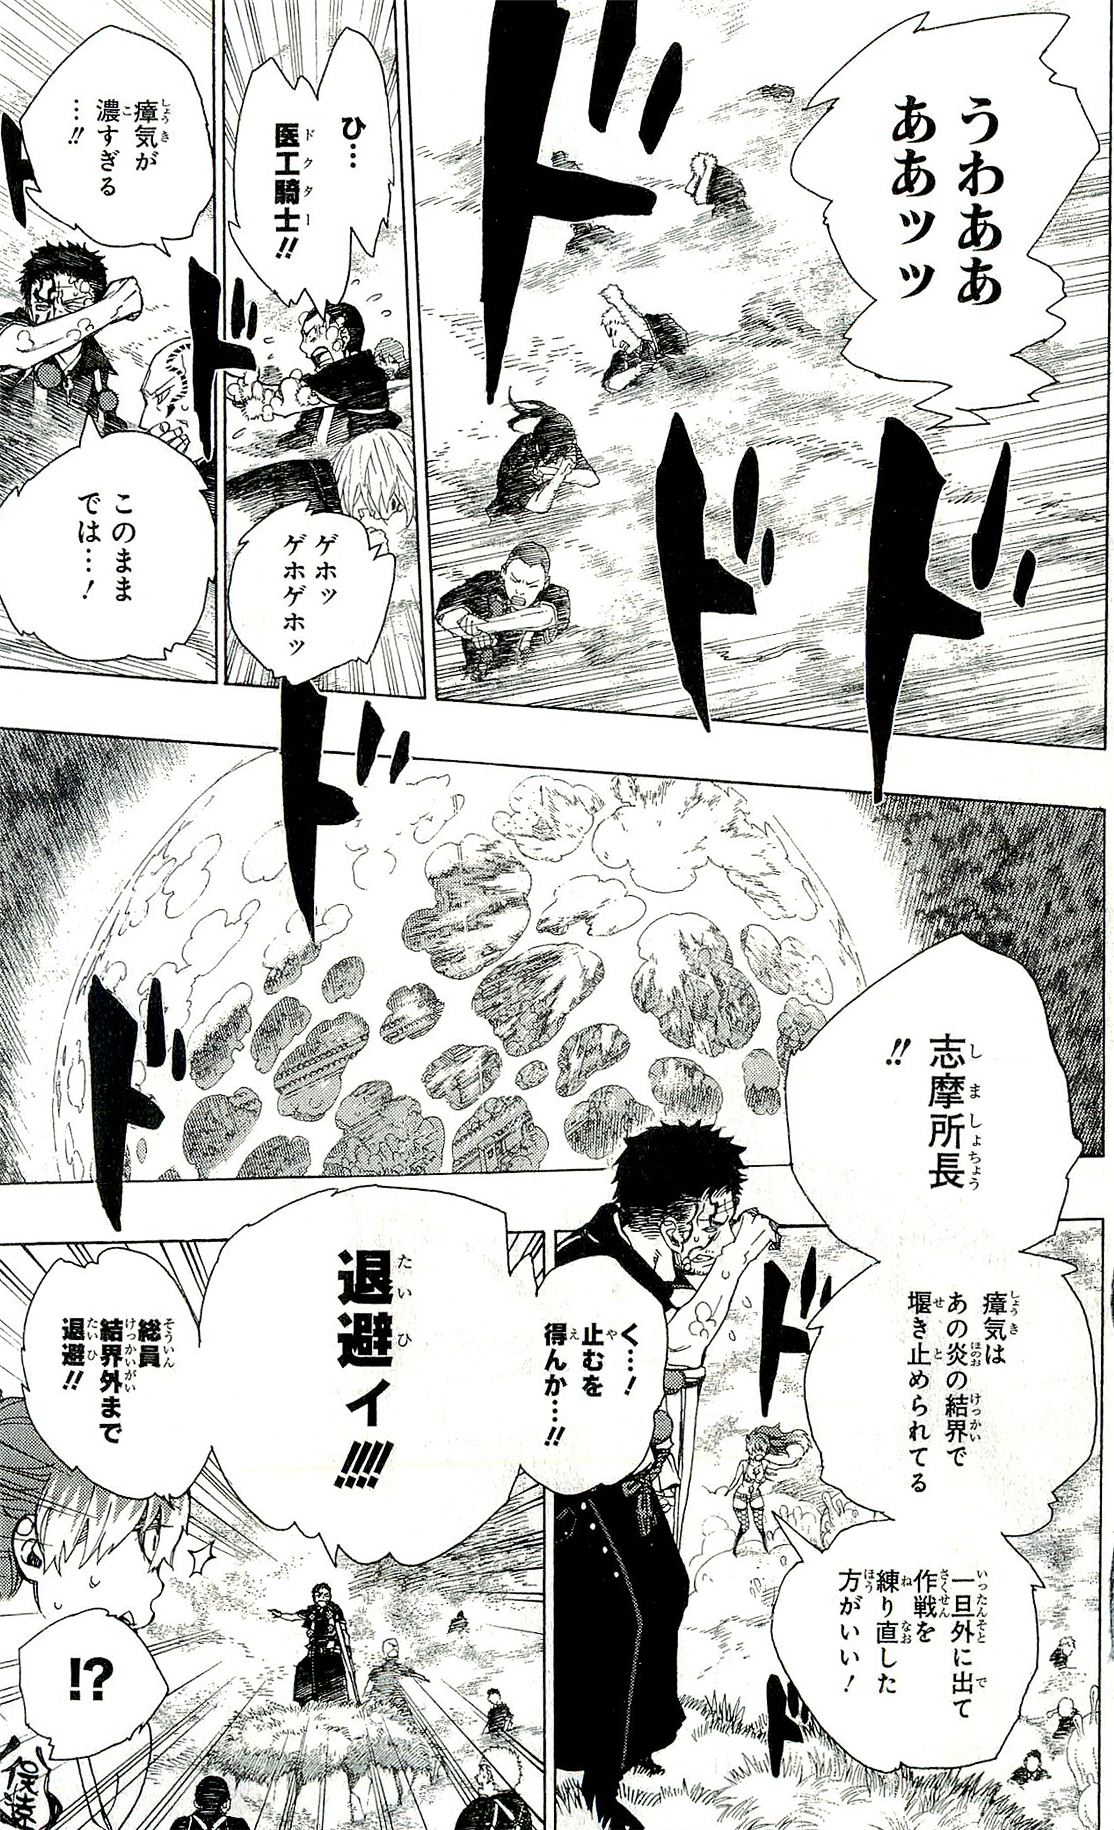 Ao no Exorcist - Chapter 31 - Page 2